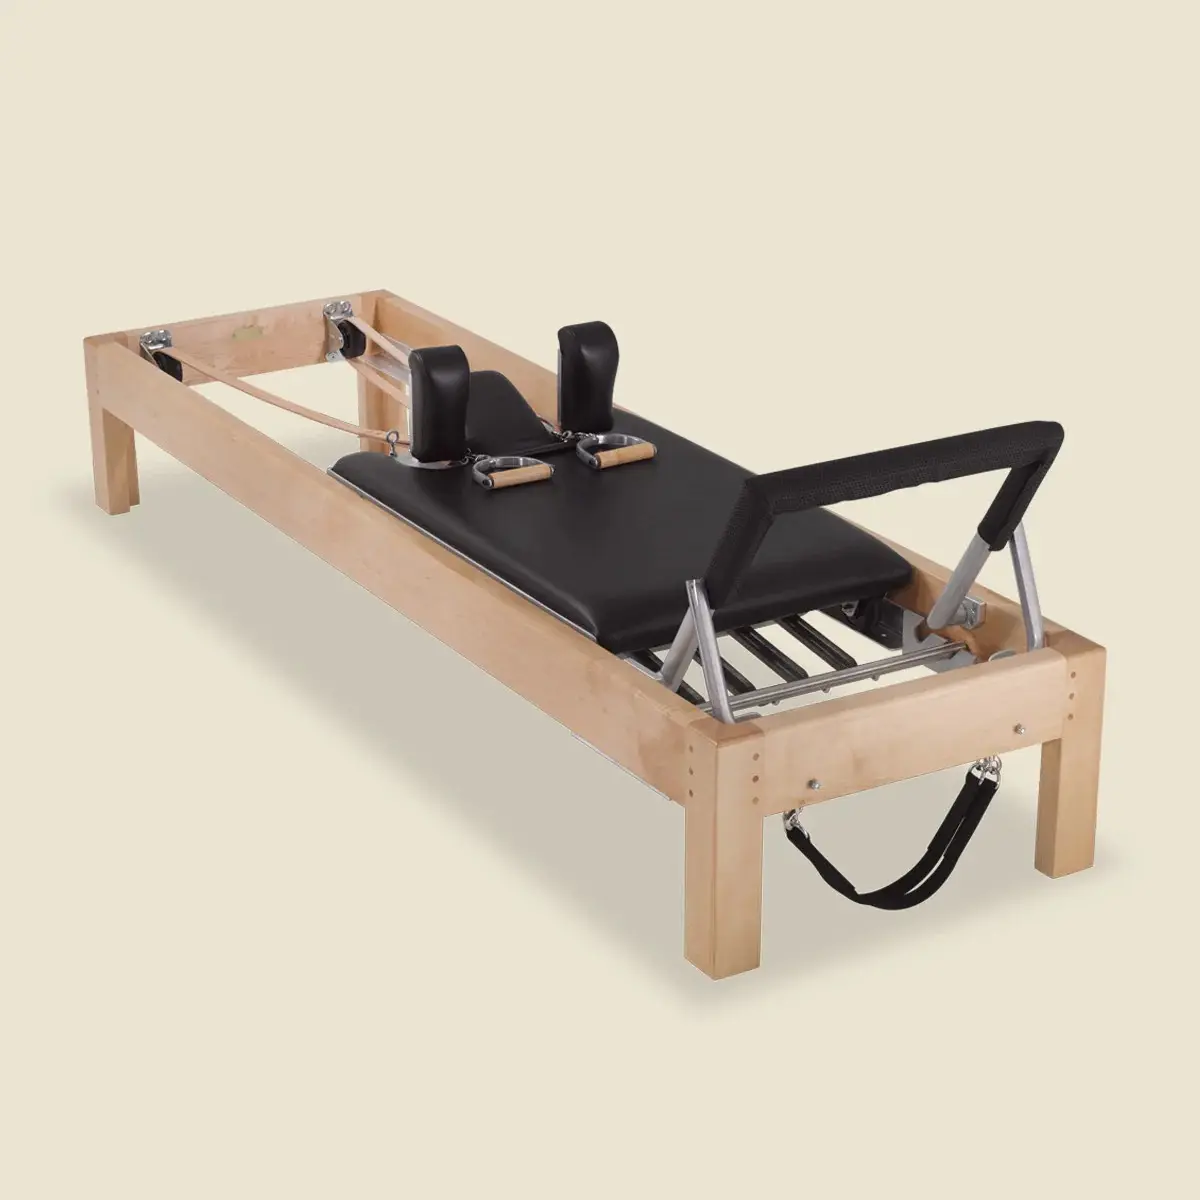 The New Stott Pilates Reformer Foldable Reformer High Quality Fitness Machine Classical Pilates Bed